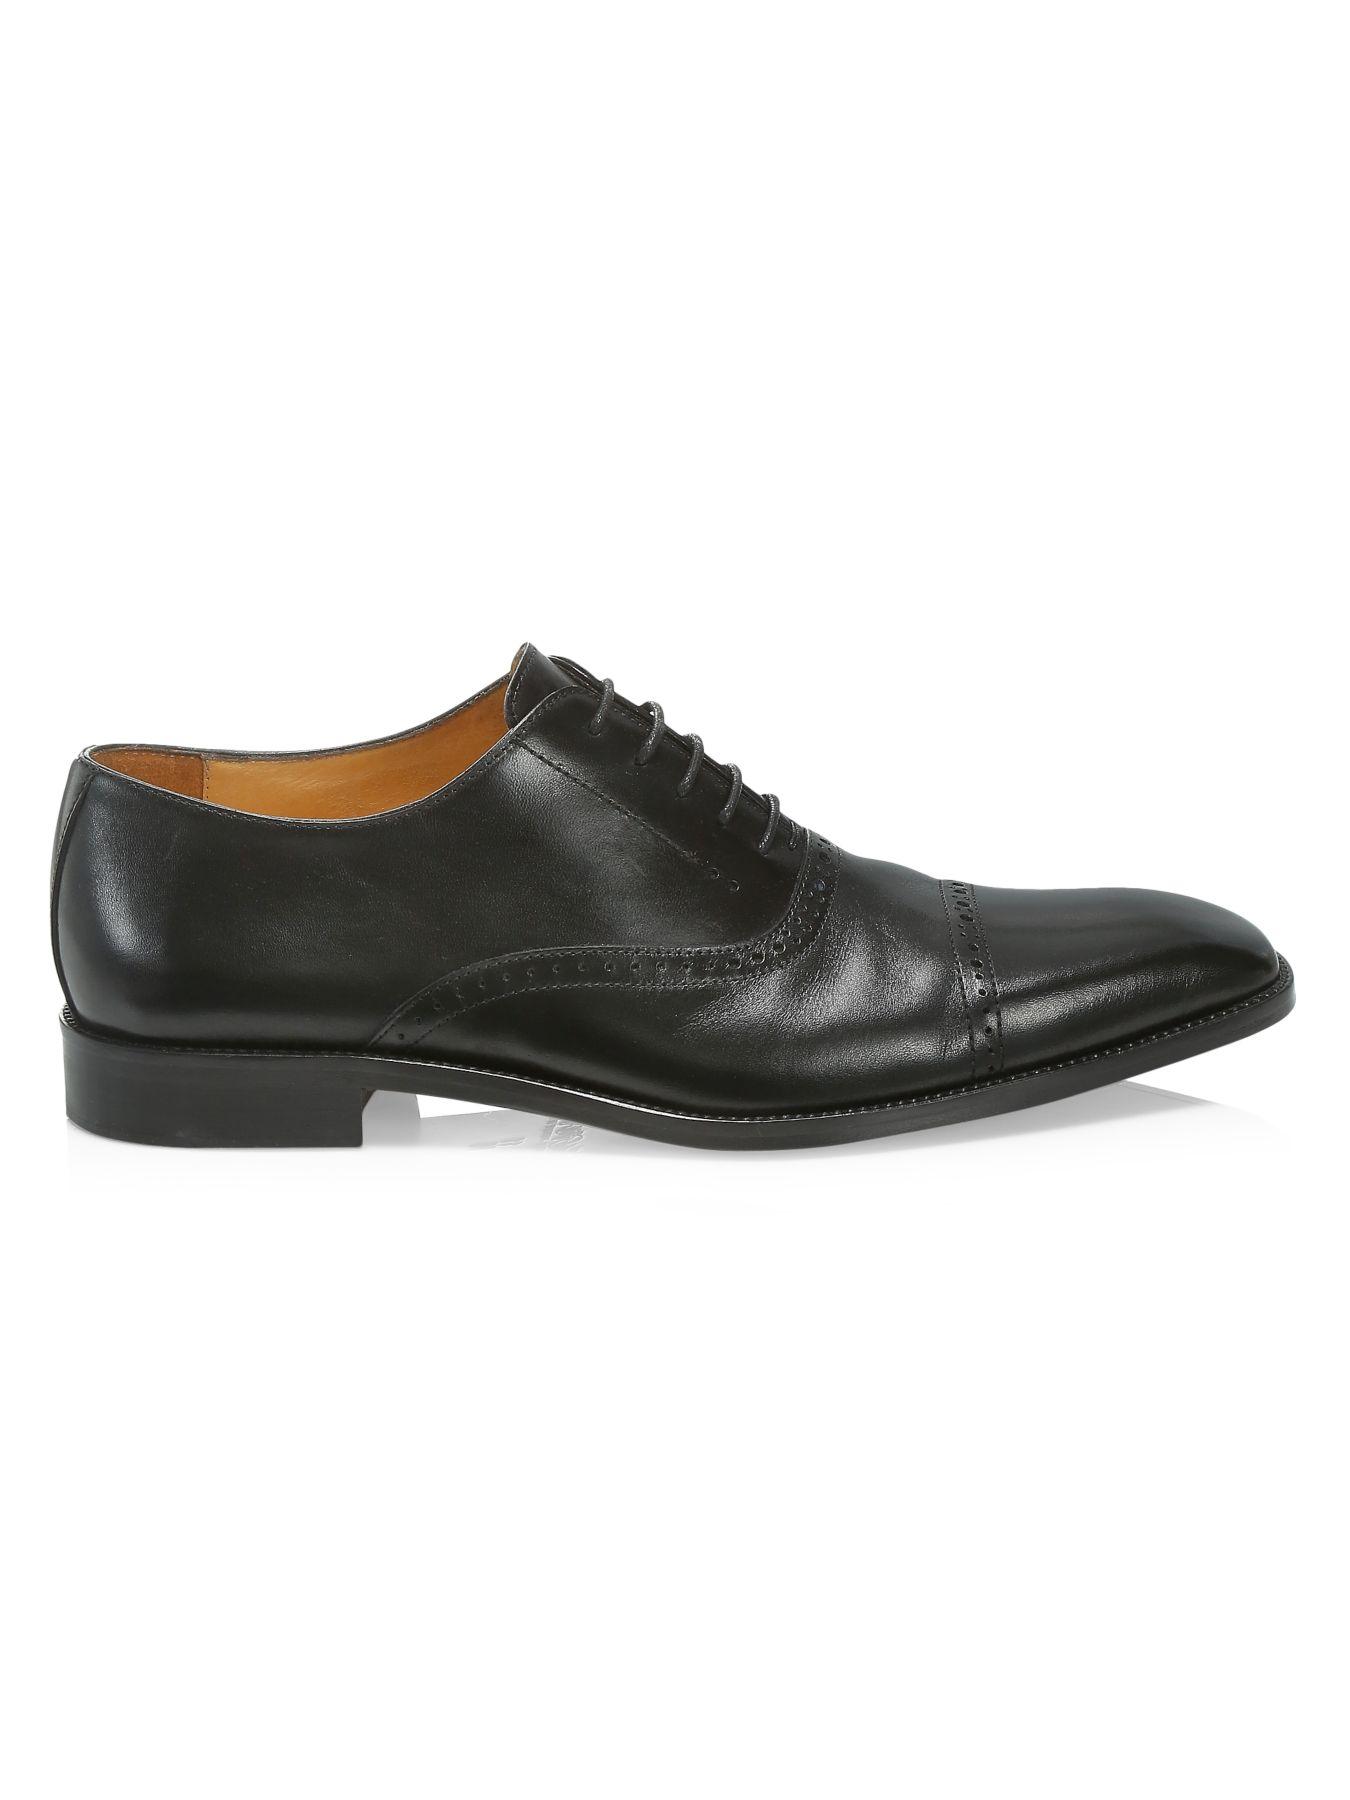 Saks Fifth Avenue Collection Delancey Cap Toe Leather Brogue Oxfords in ...